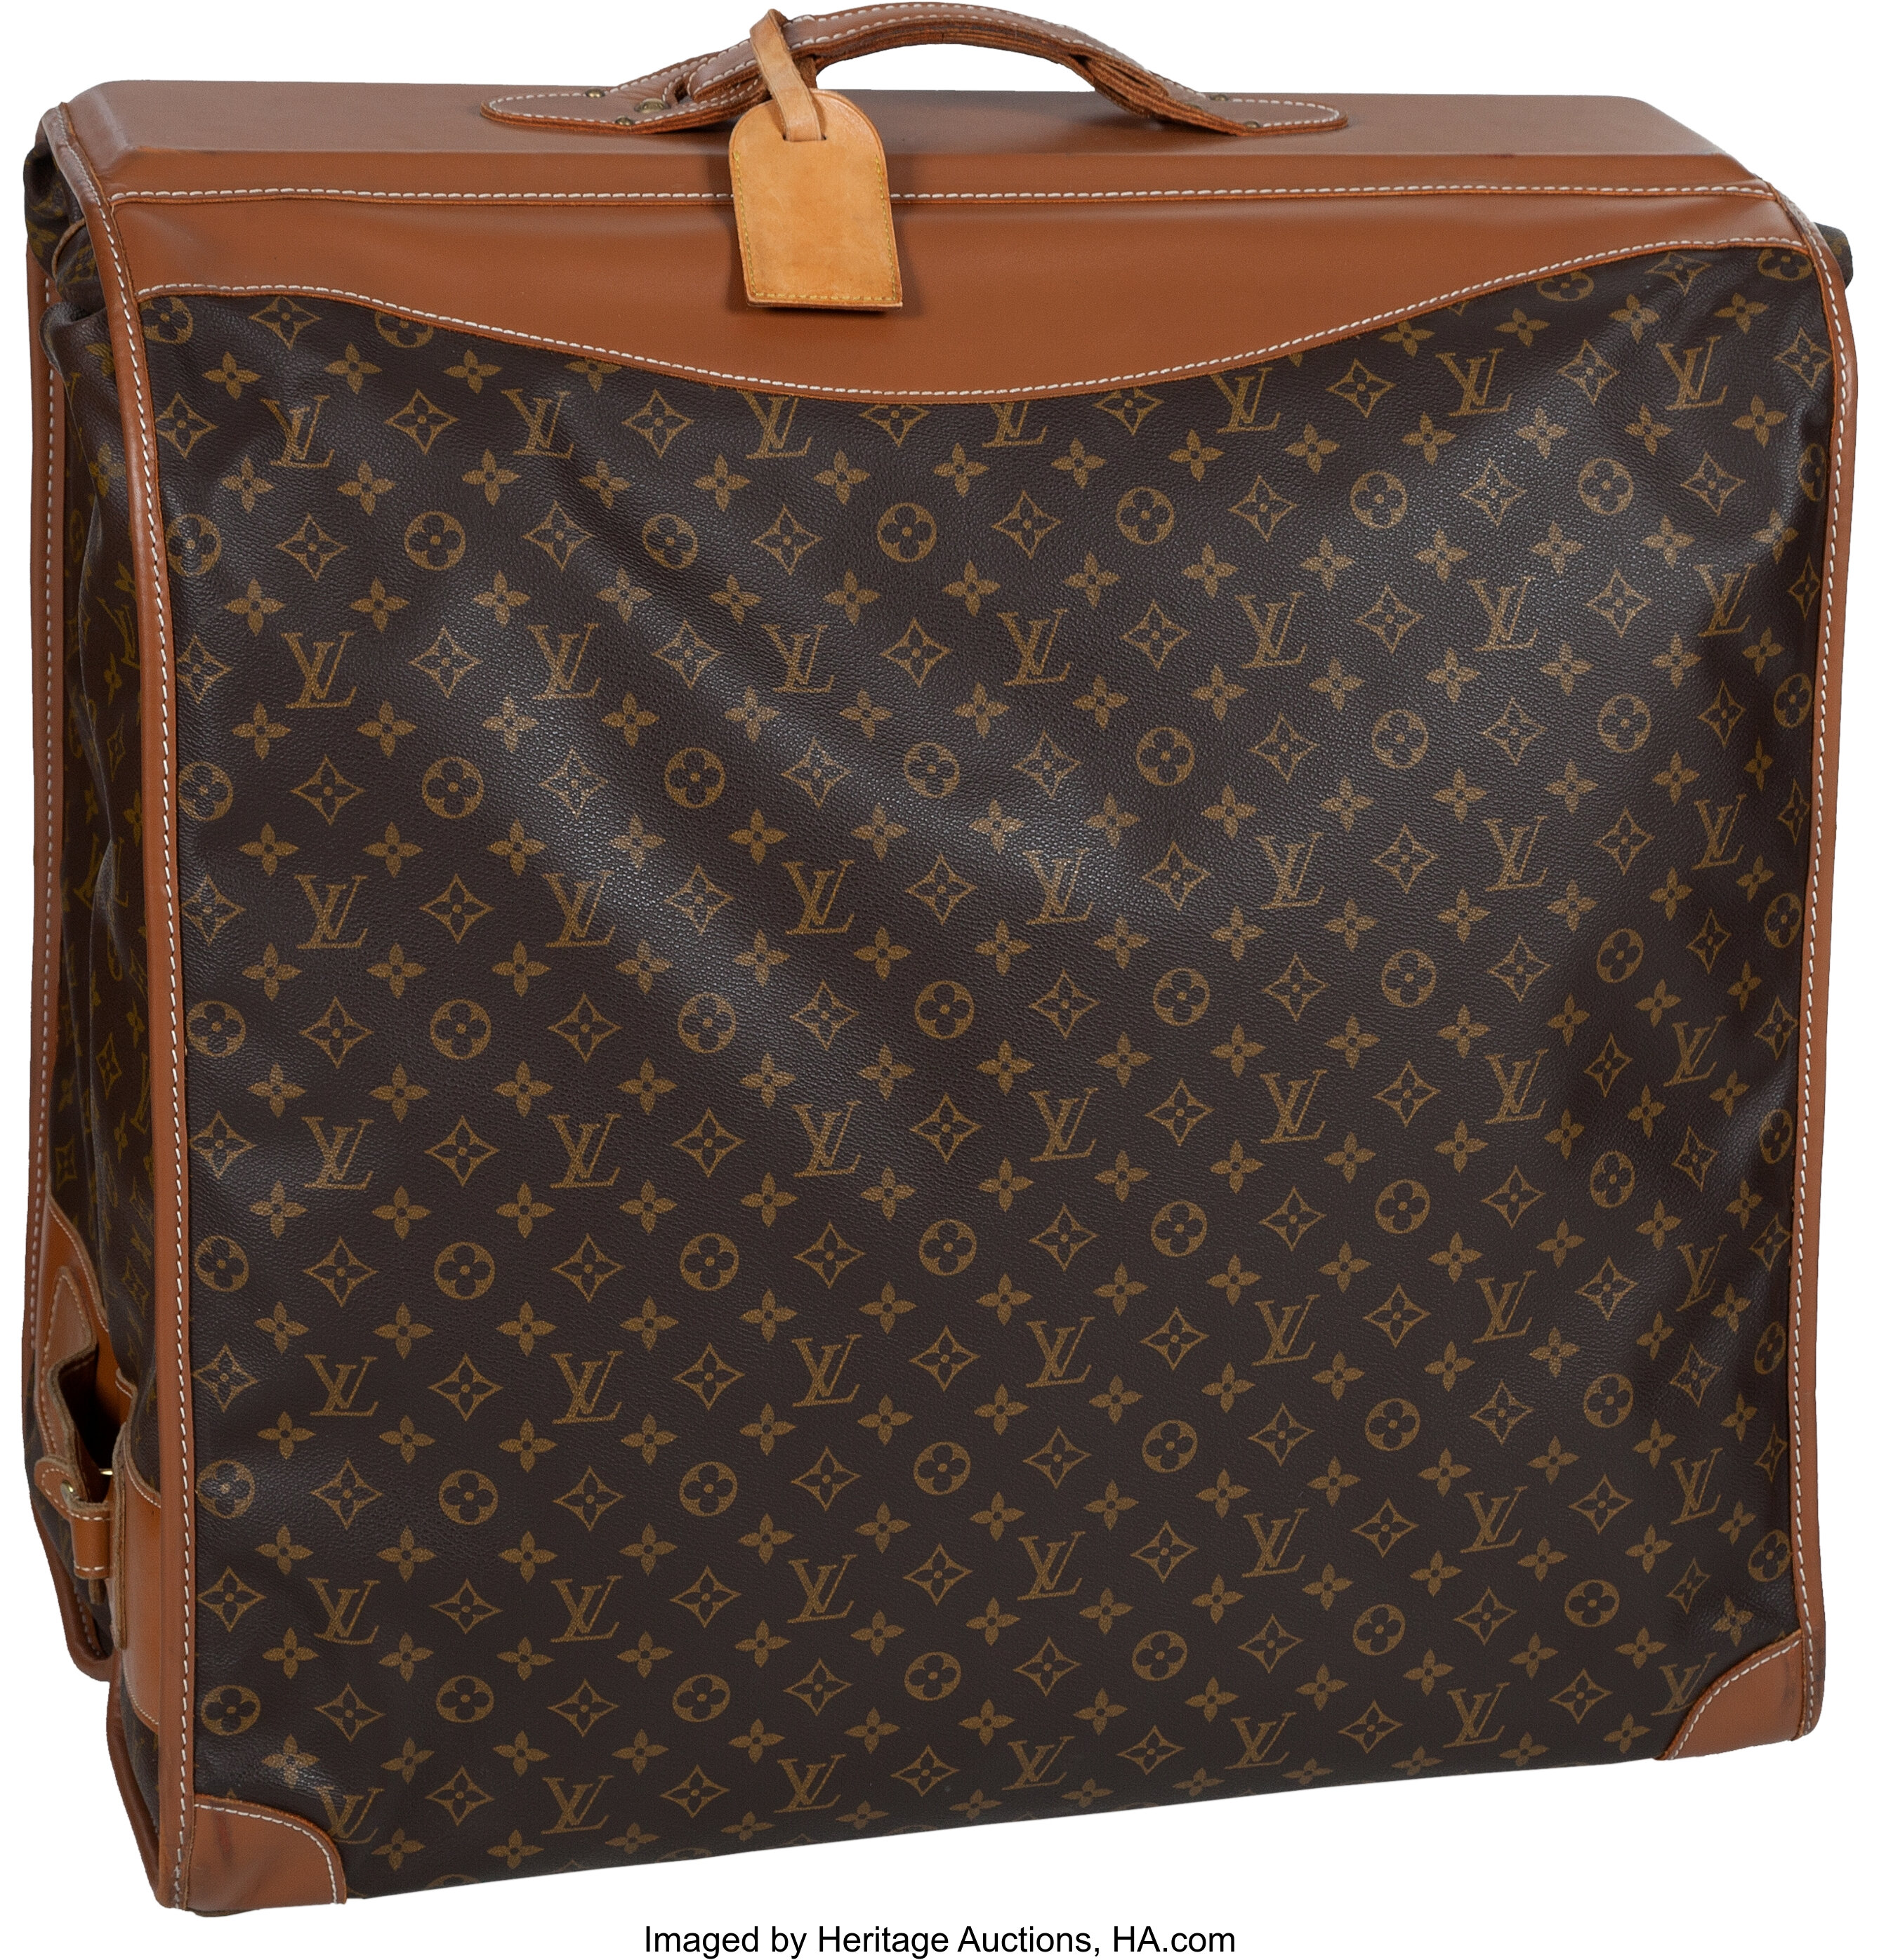 Vintage Louis Vuitton Luggage Set made by The French Company